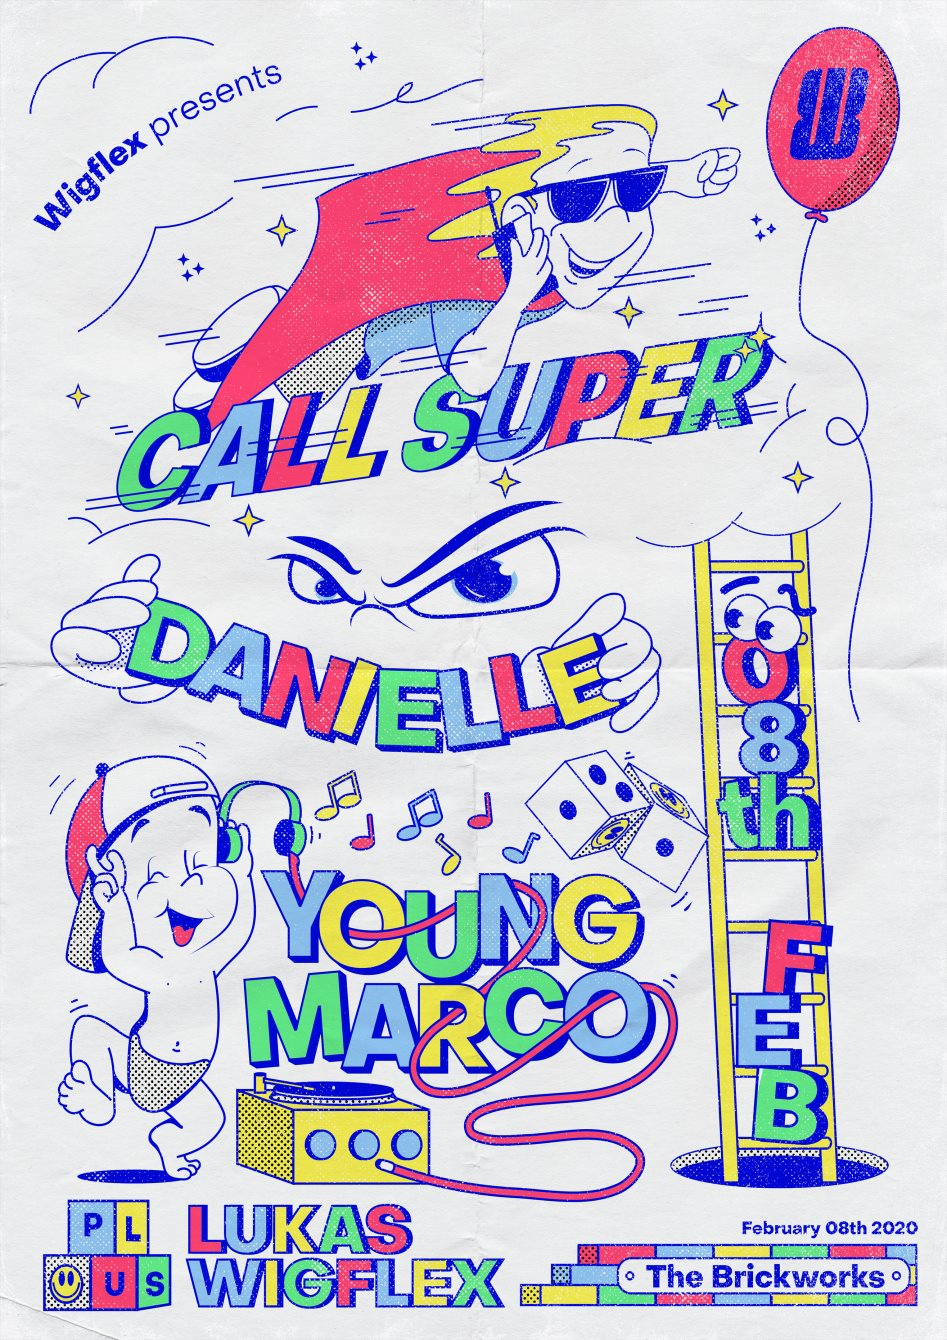 Wigflex: Call Super, Danielle and Young Marco - Flyer front